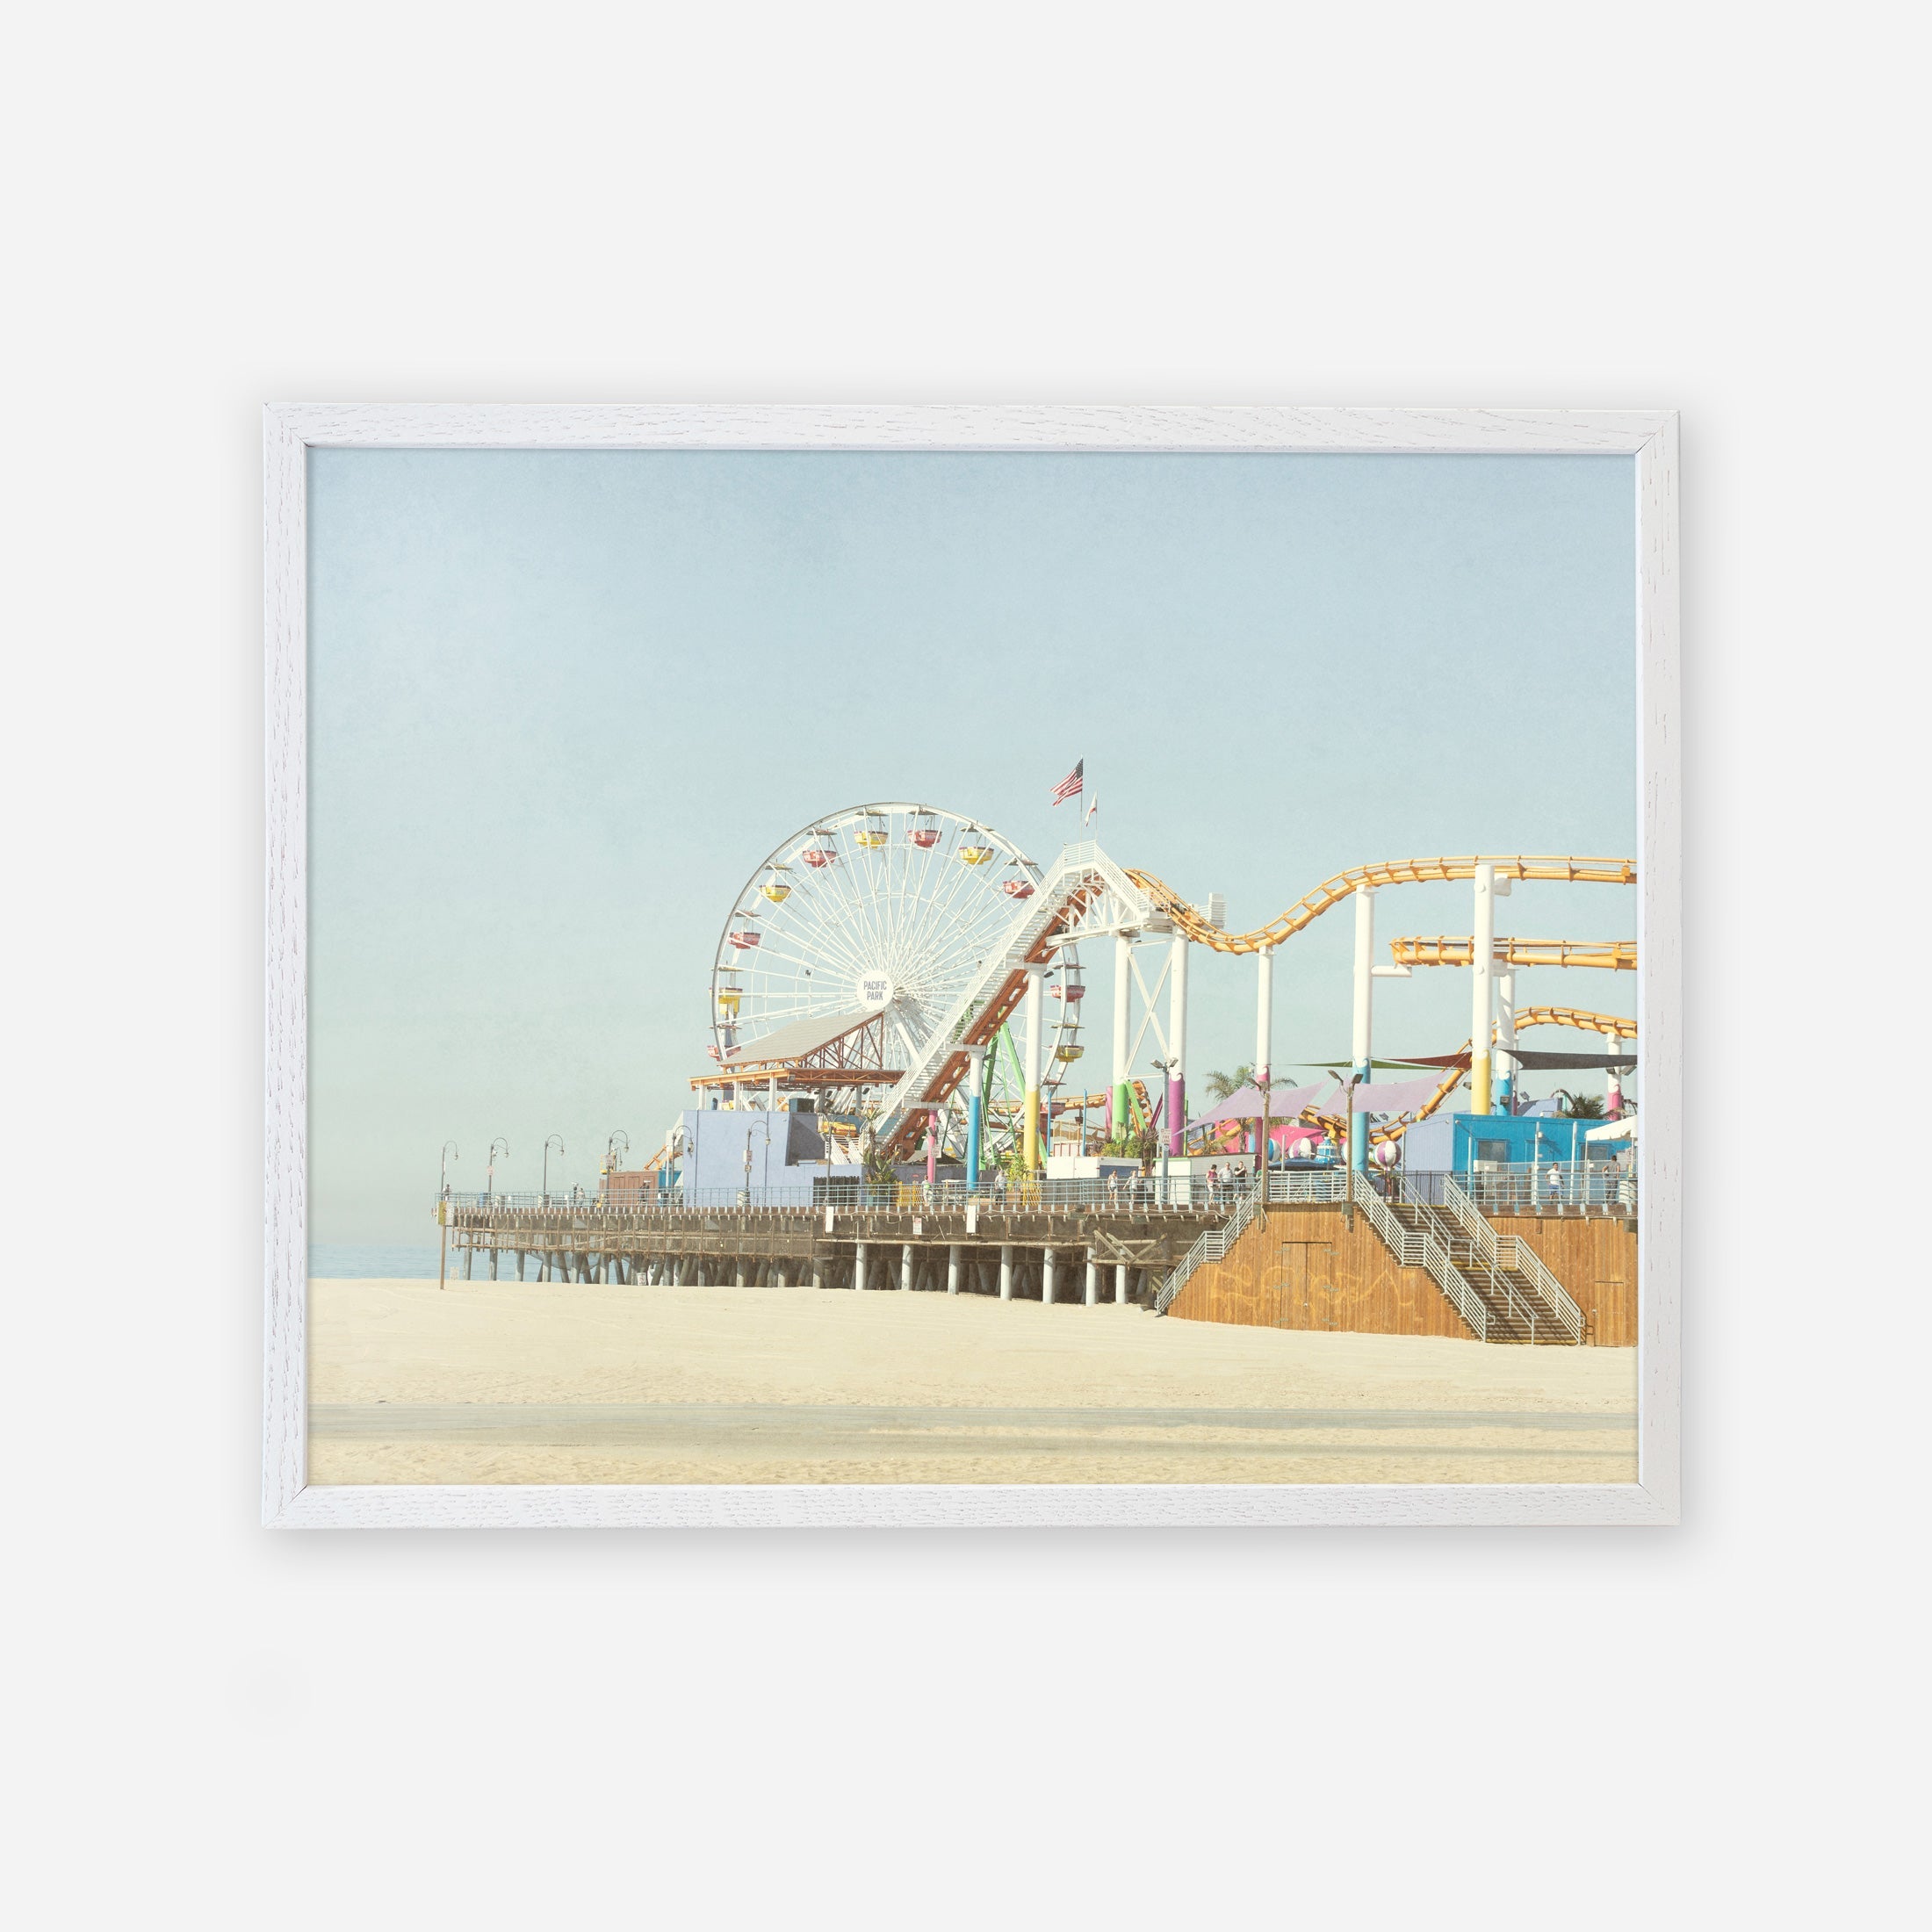 Vintage-style image on archival photographic paper of Santa Monica Pier featuring a ferris wheel and roller coaster on a pier, under a clear sky - Offley Green California Print, &#39;Santa Monica Pier&#39;